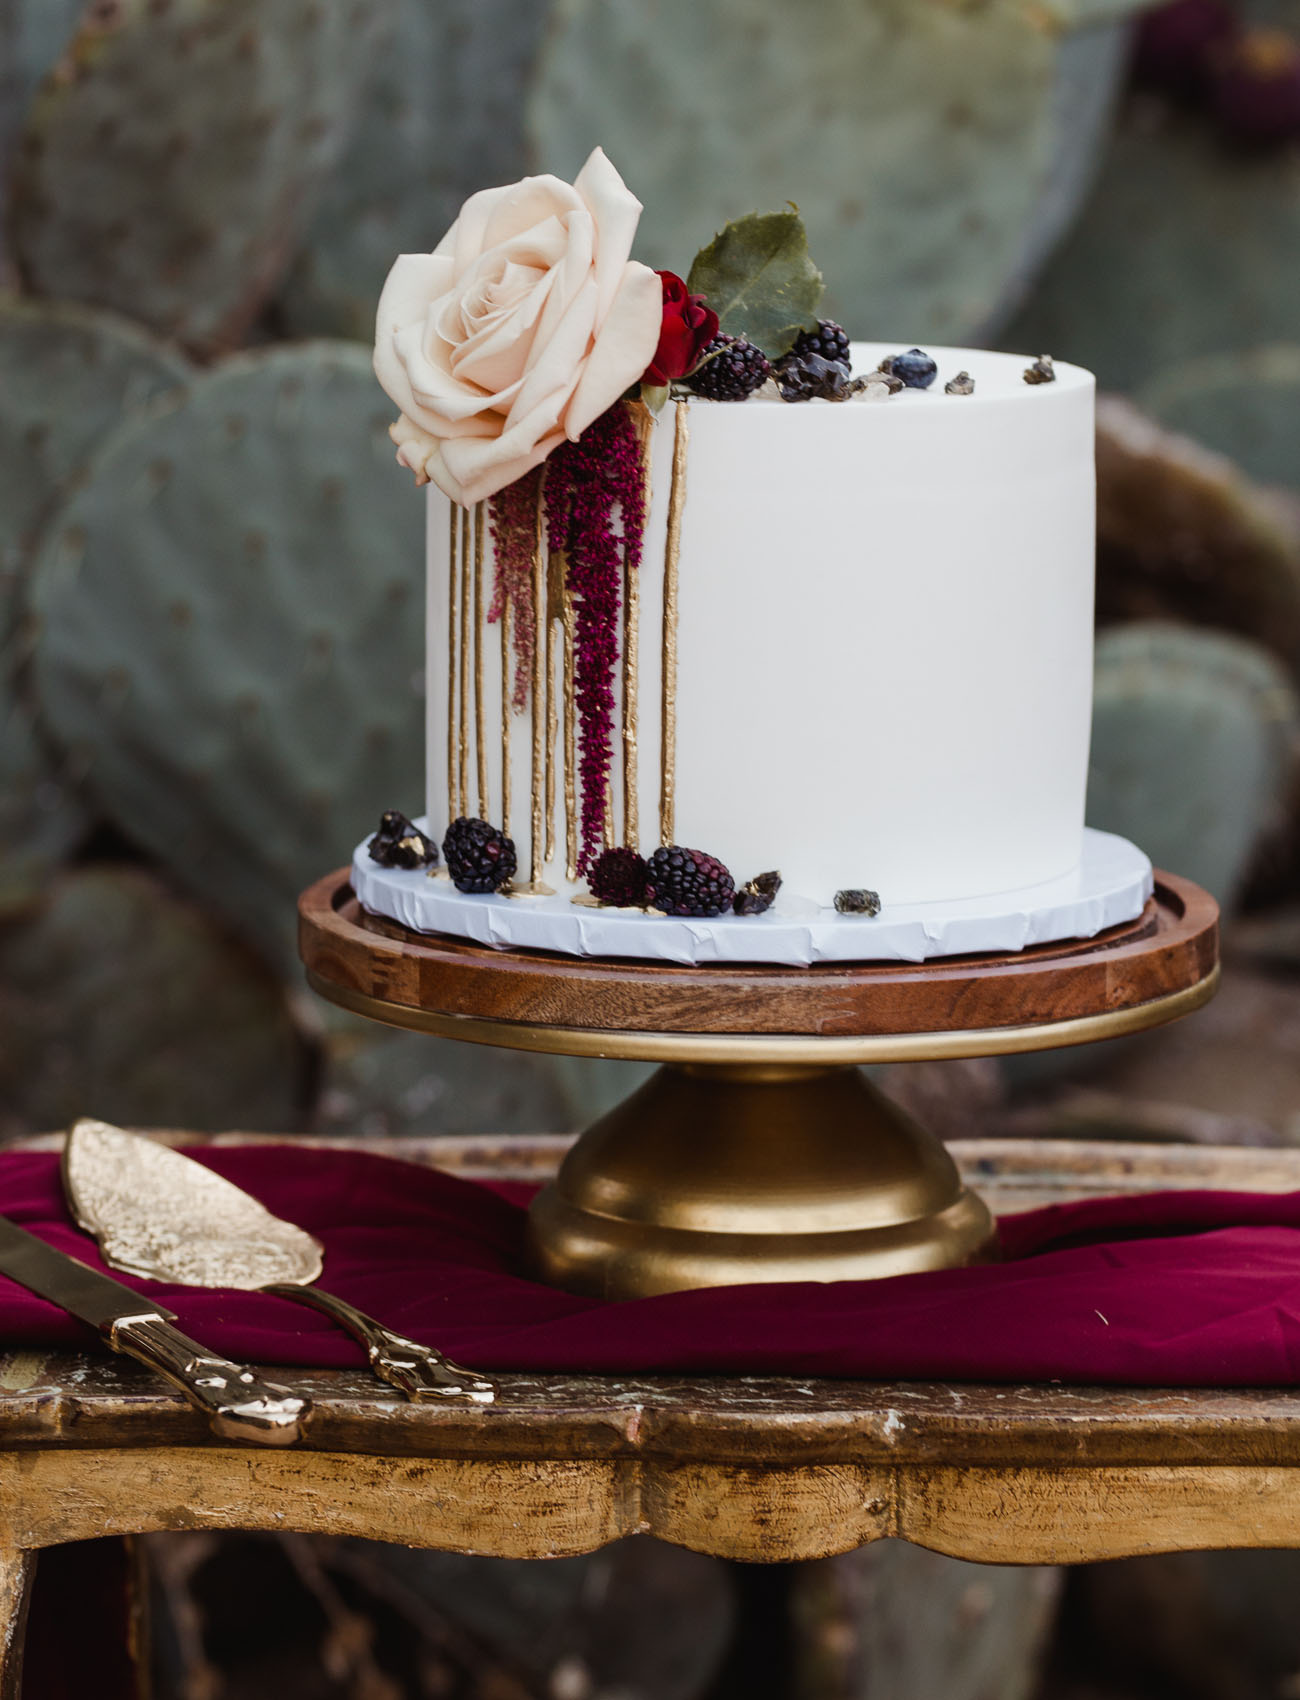 The wedding cake was a white one, with gold drip, blackberries, blush and red blooms